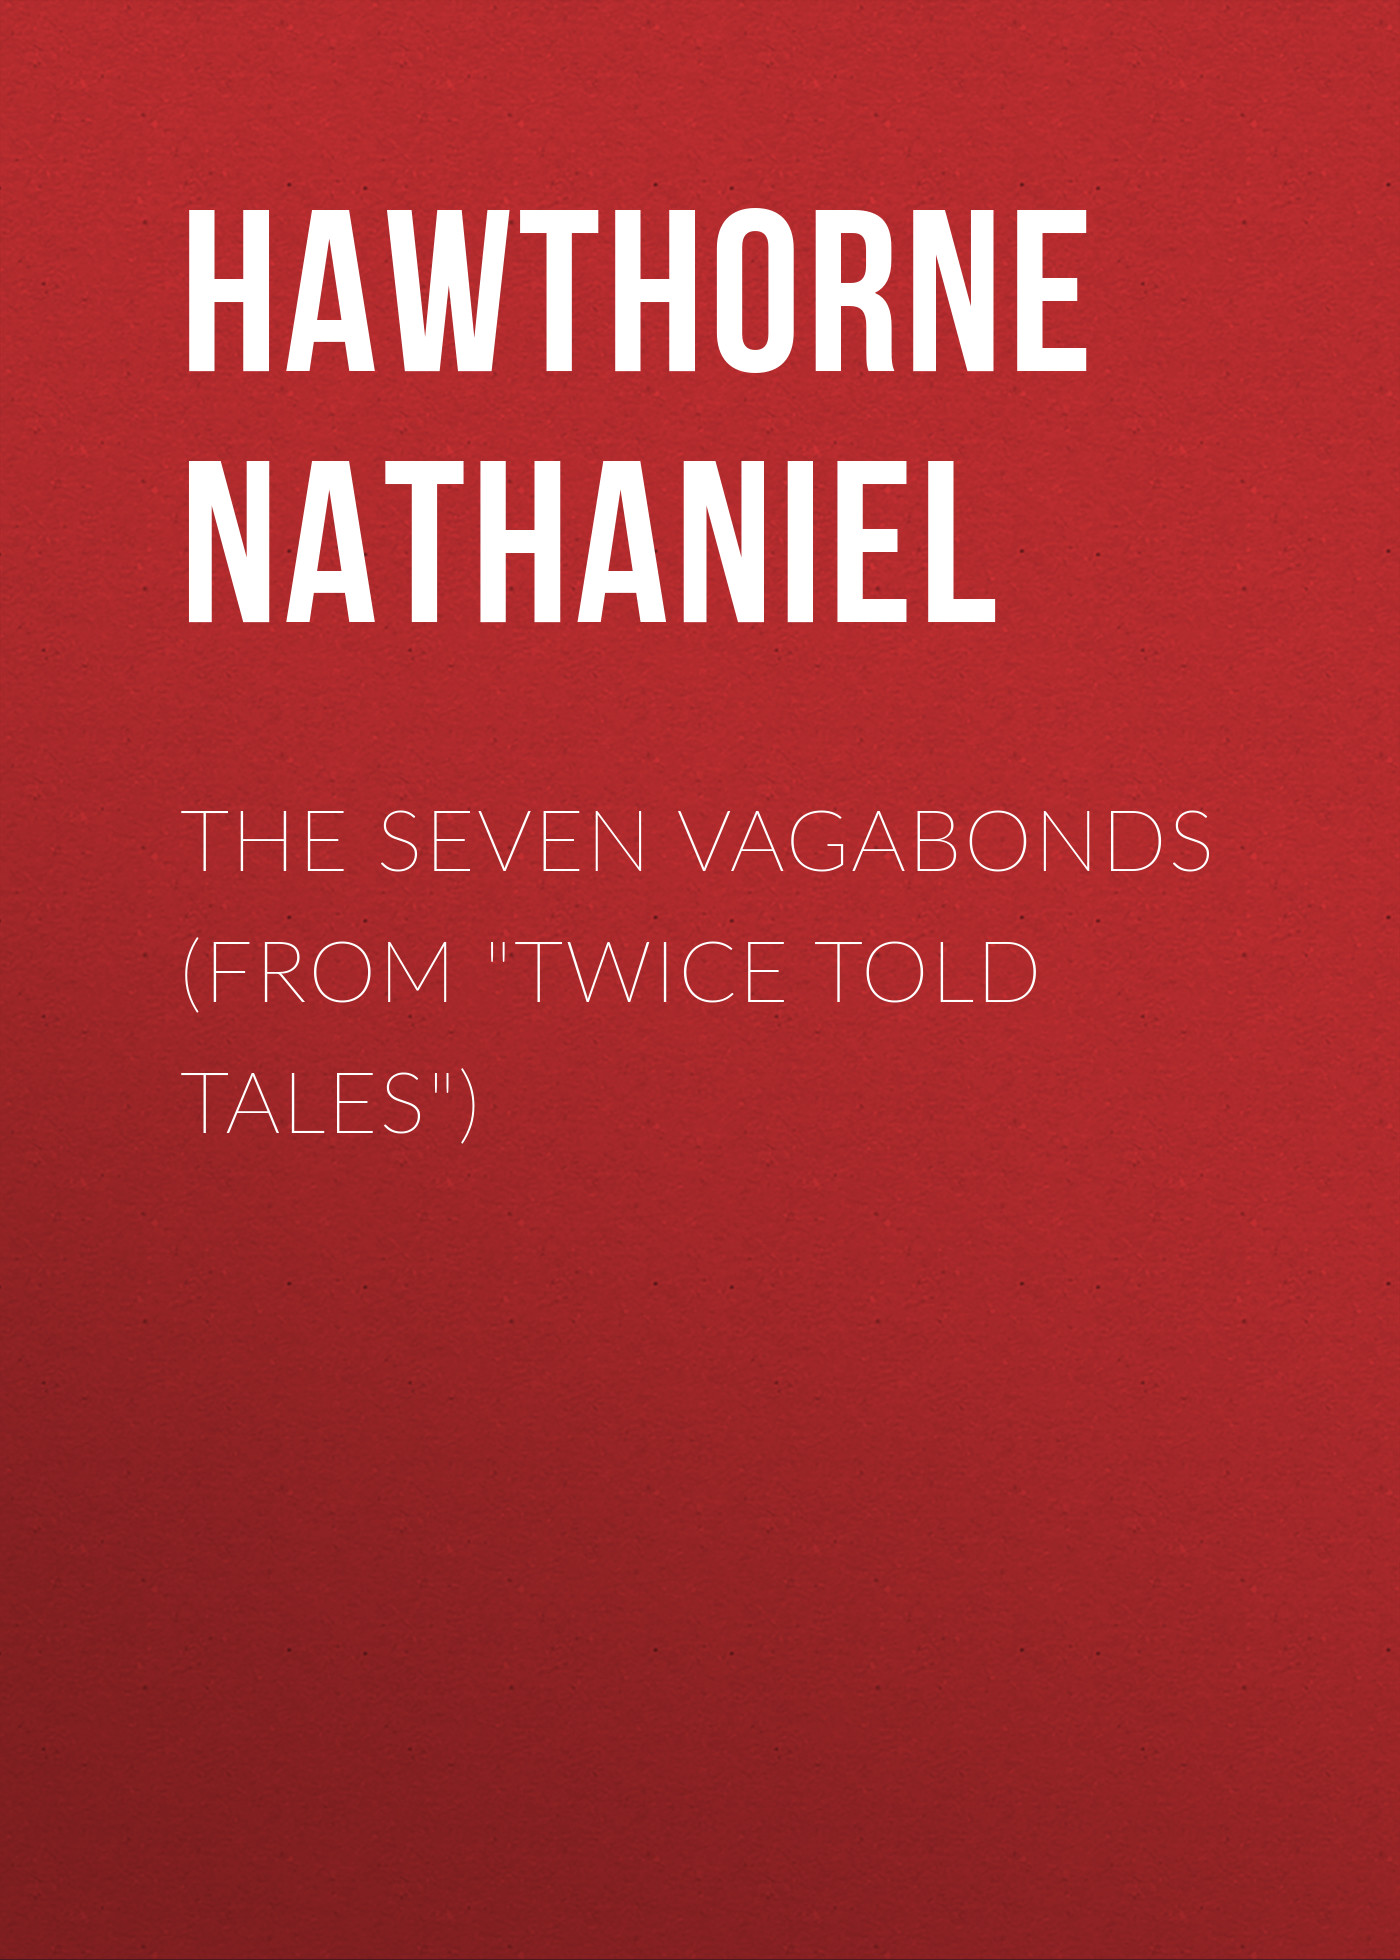 The Seven Vagabonds (From"Twice Told Tales")